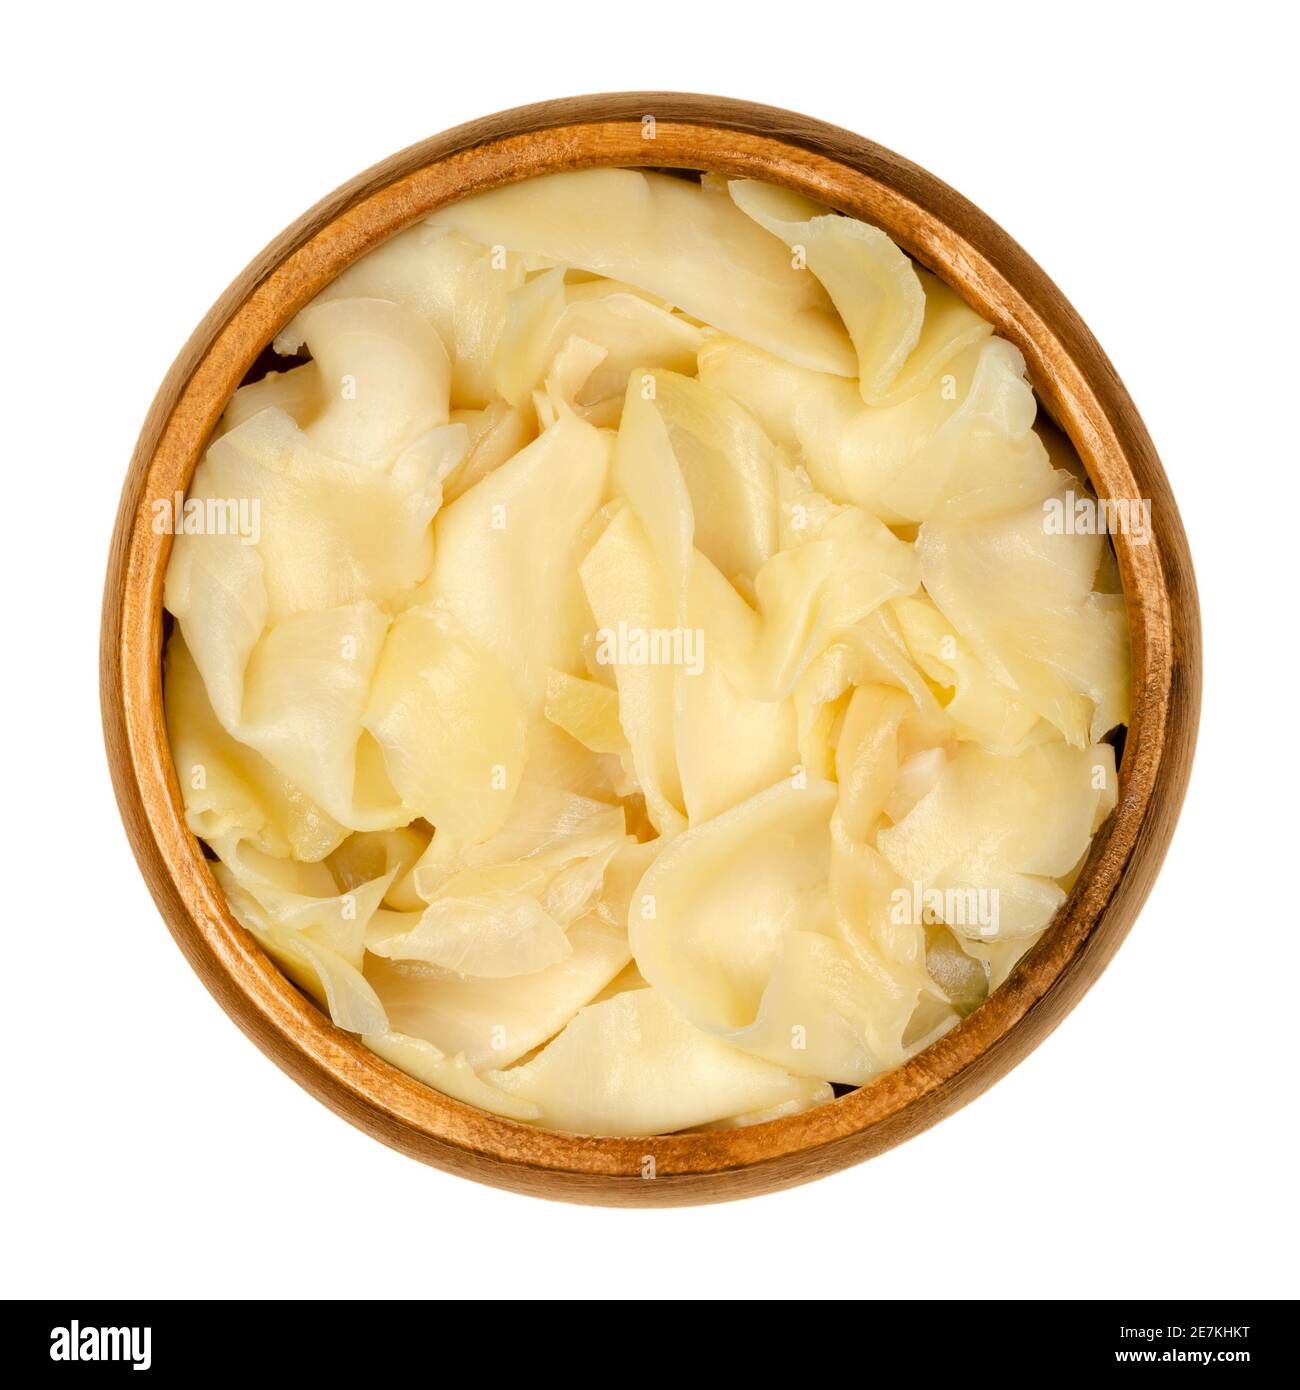 Gari, pickled ginger in a wooden bowl. Thinly sliced ginger, marinated in sugar and vinegar, served after sushi. The color is pale yellow or pink. Stock Photo